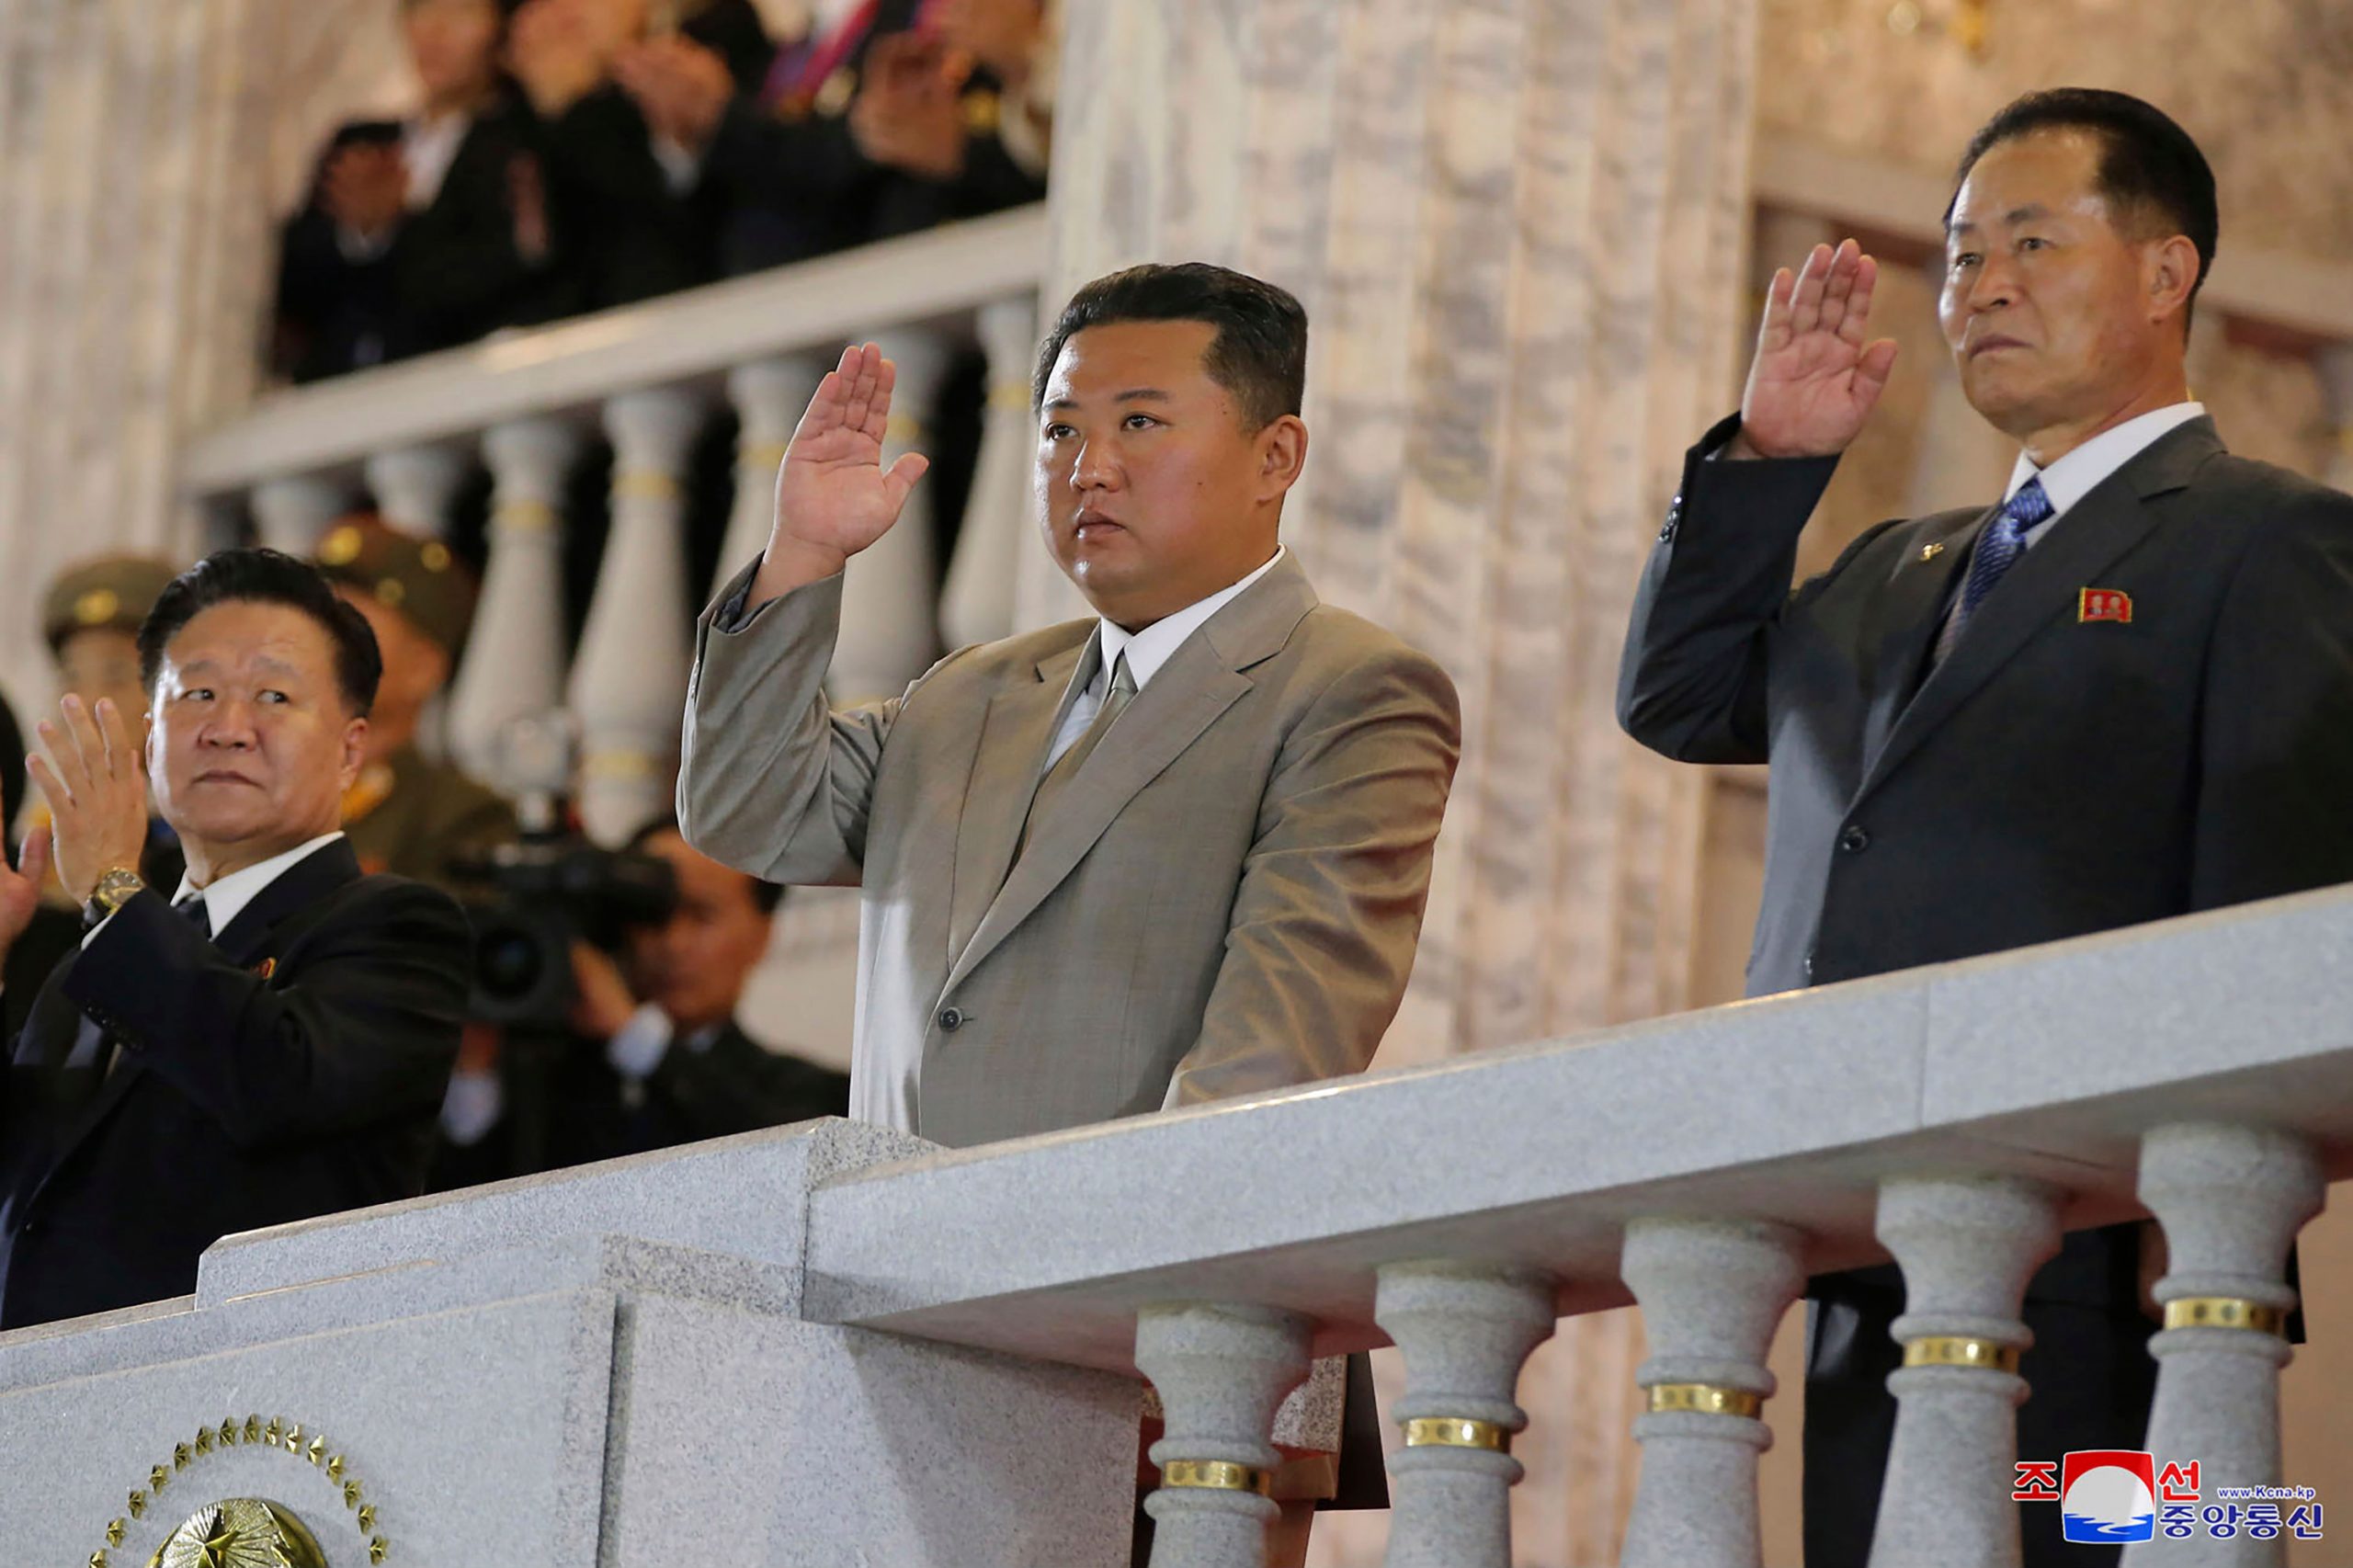 North Korea tests new cruise missiles, the first such known test in months